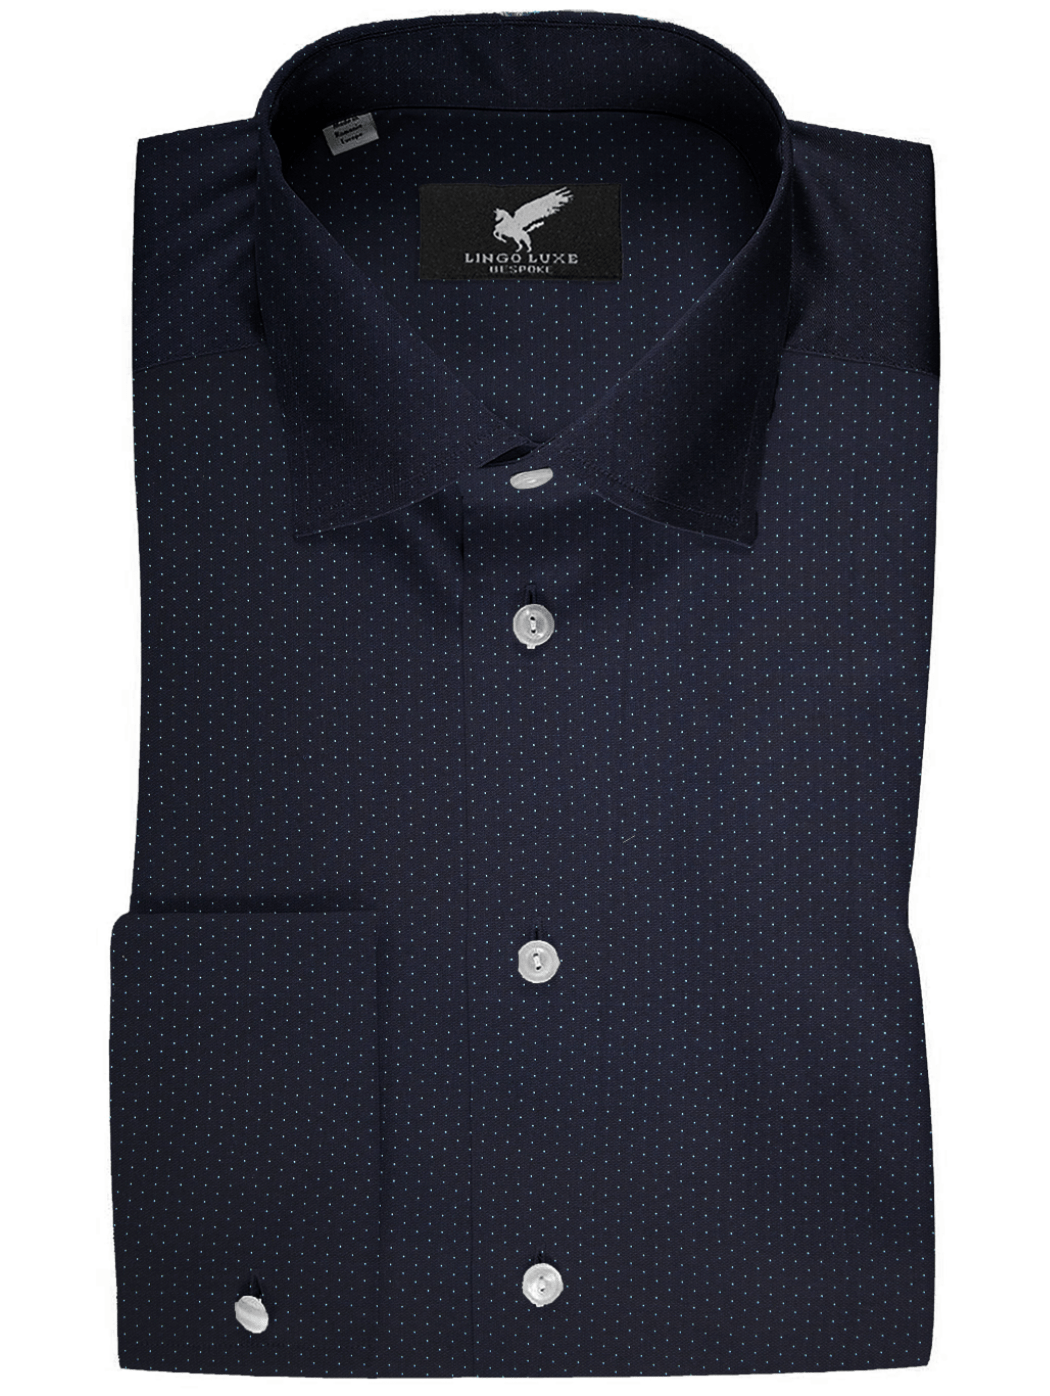 Navy with White Microdot Shirt